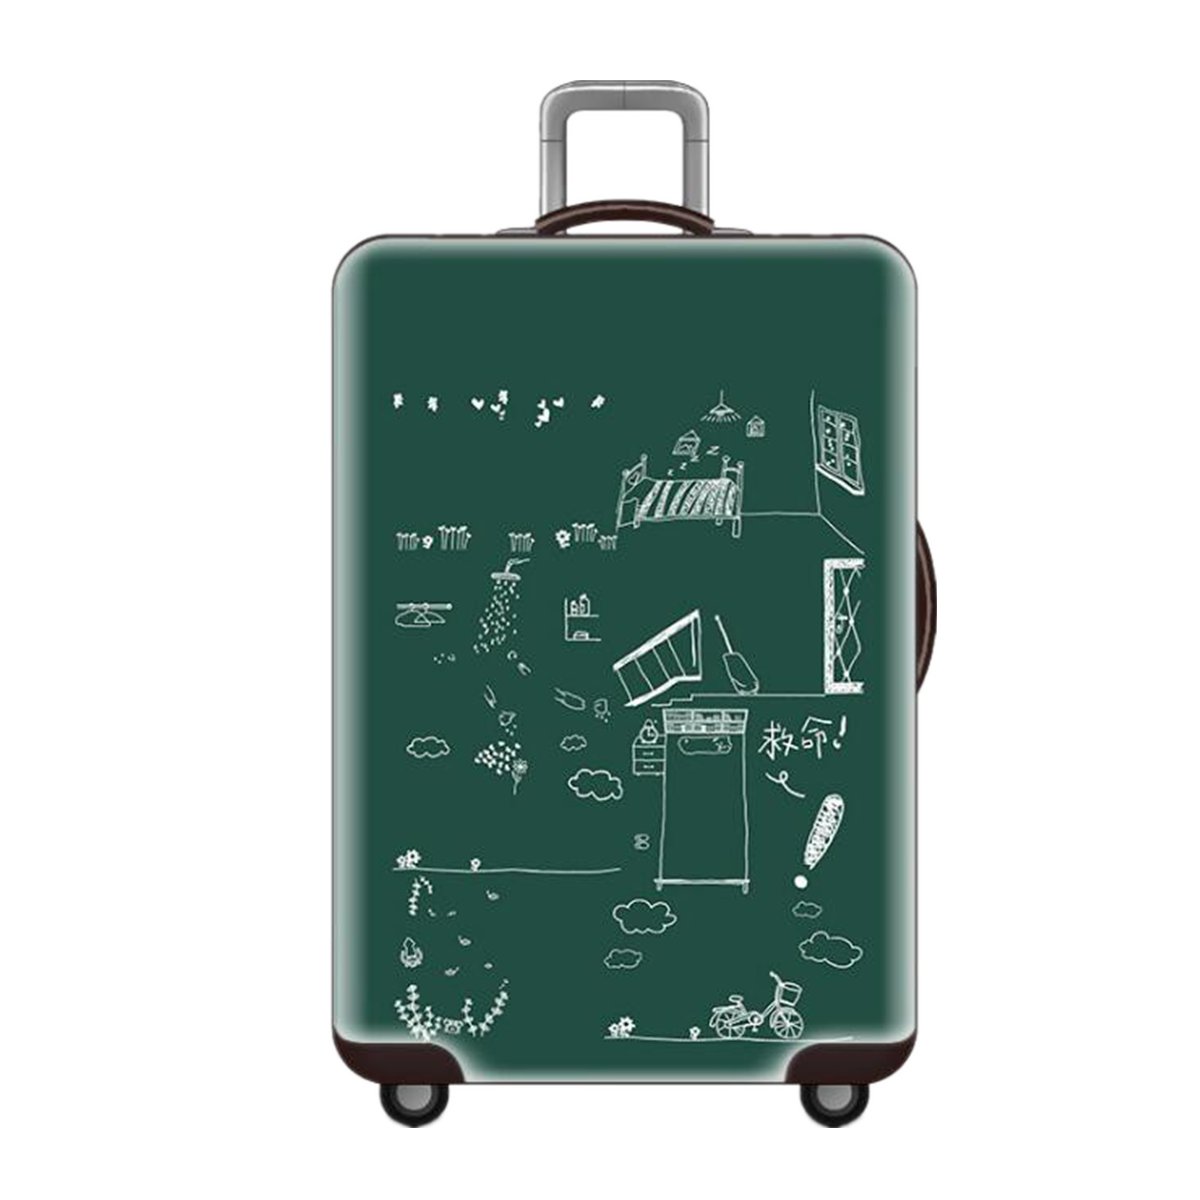 Elastic-Luggage-Cover-Travel-Suitcase-Protector-Dustproof-Protection-Trolley-Case-1465414-8